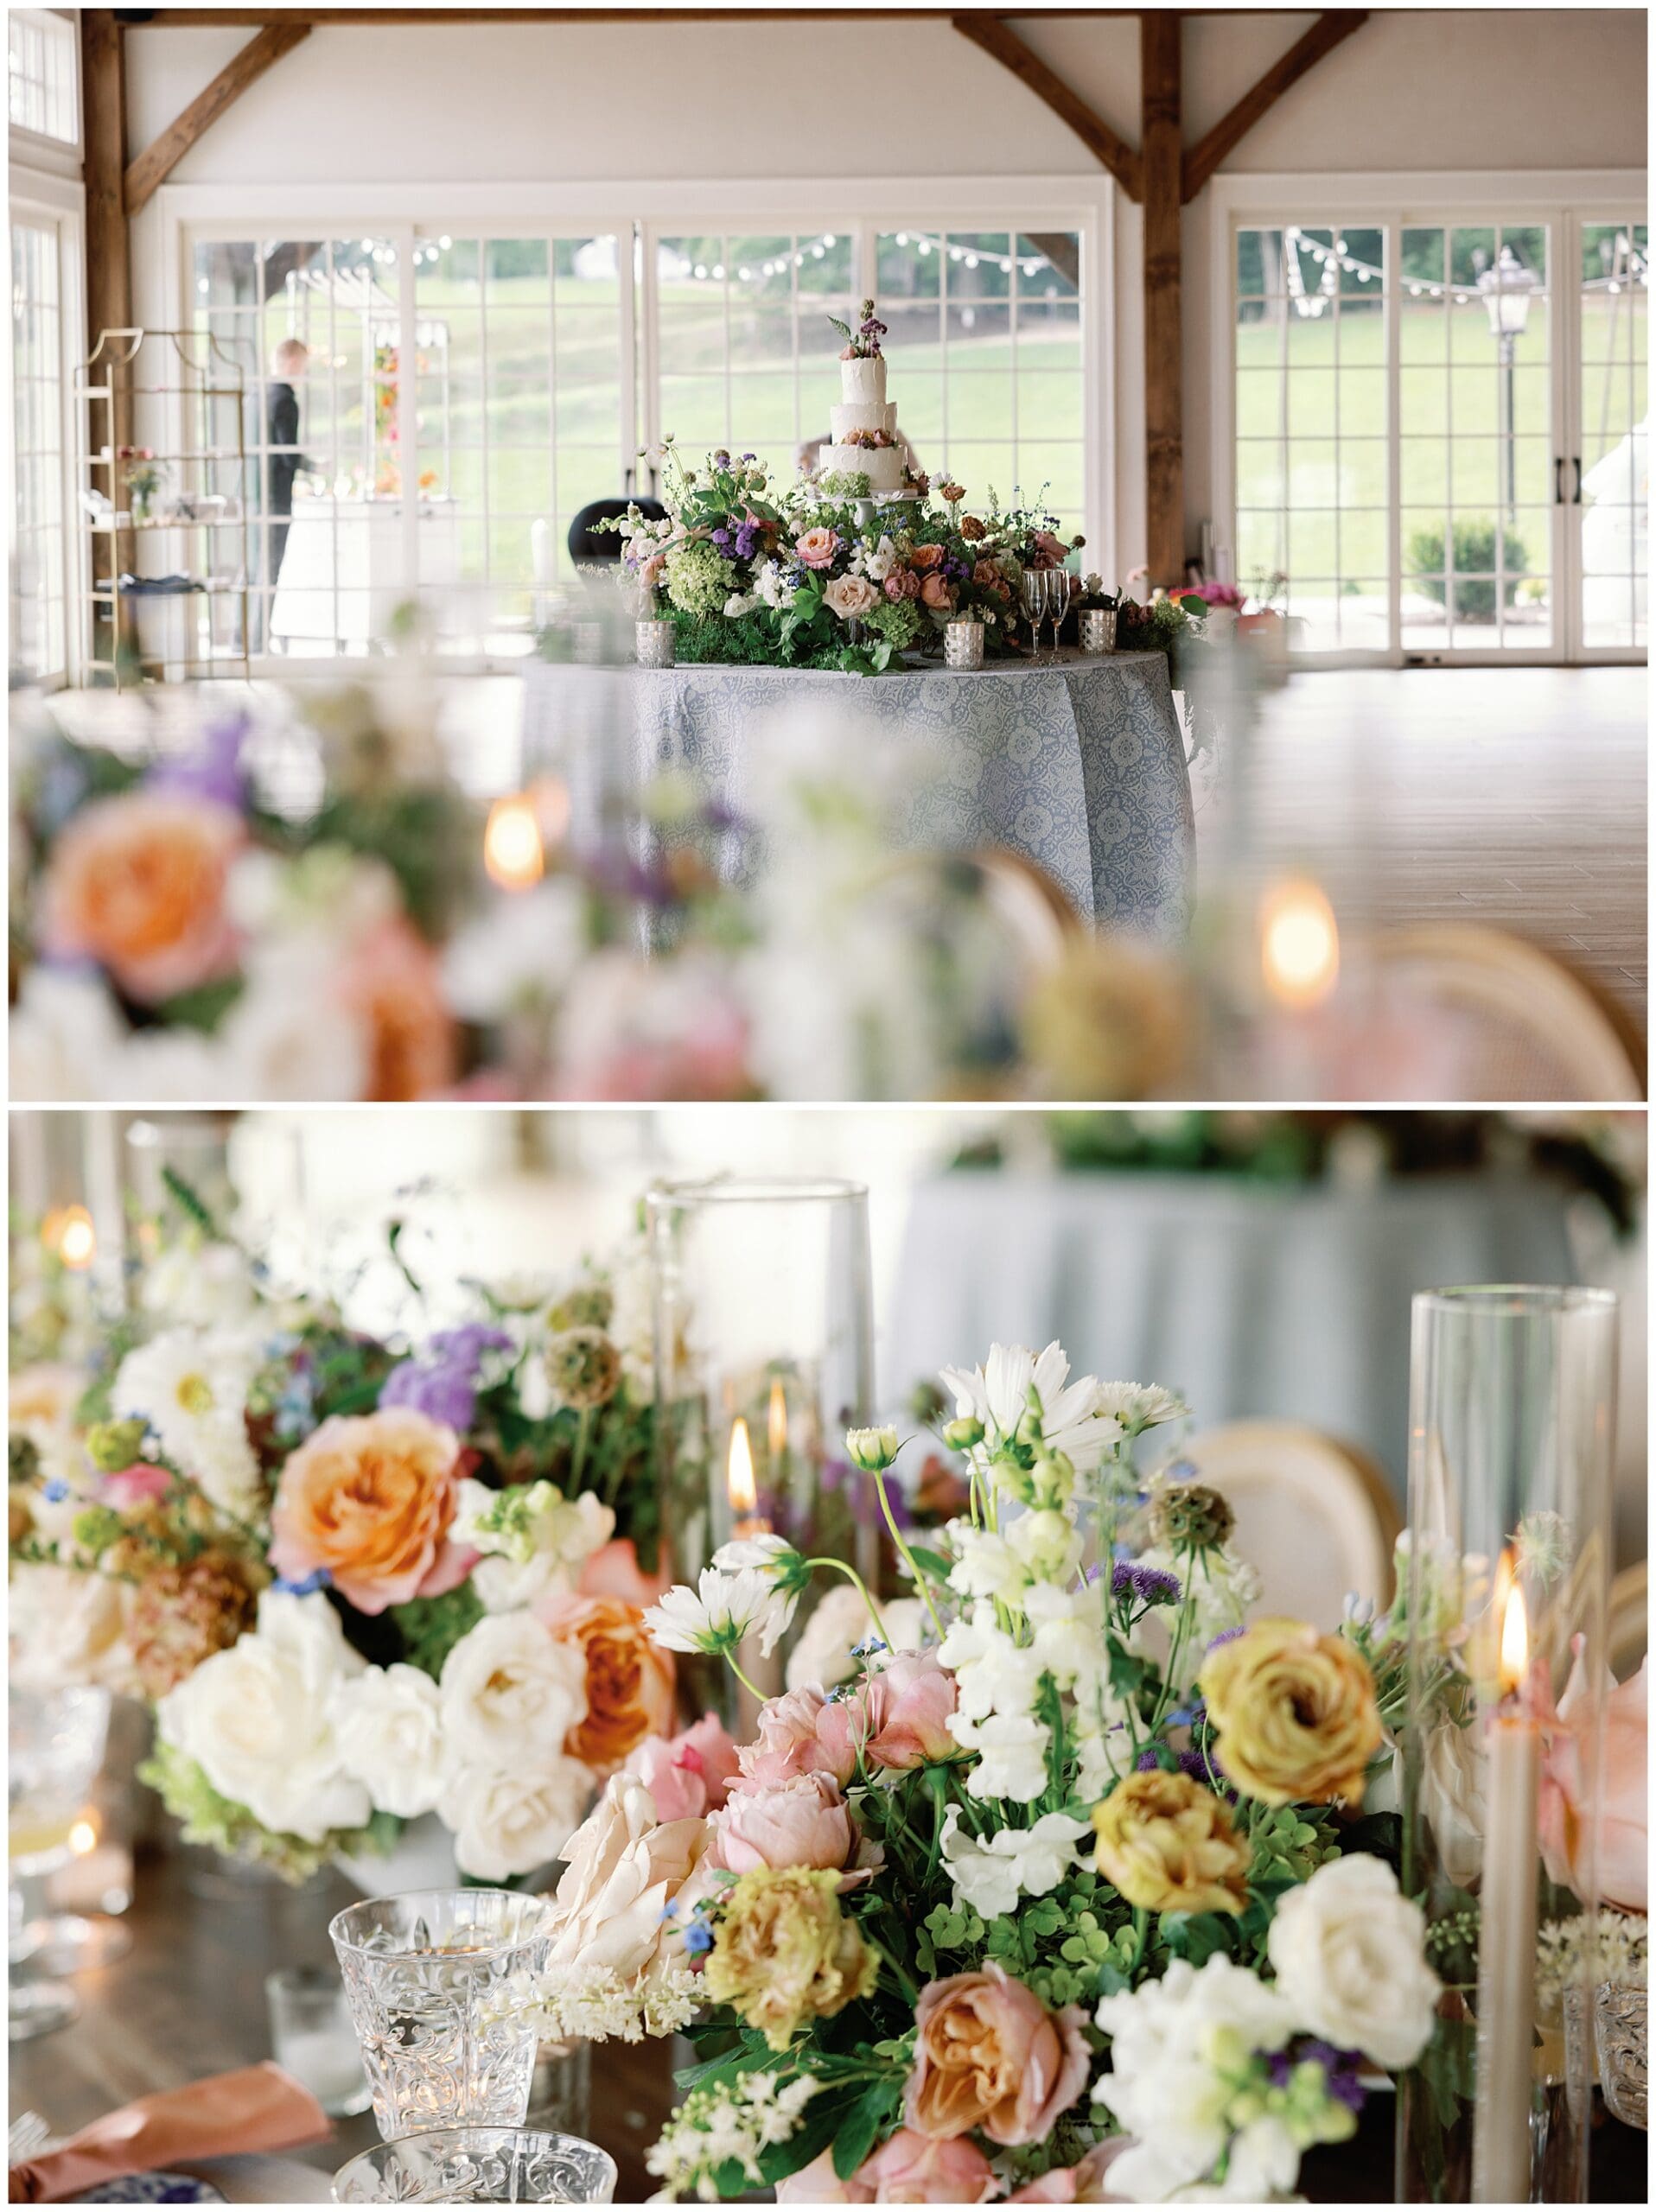 A Parisian-inspired summer wedding table setting with flowers and candles in a barn at The Ridge.